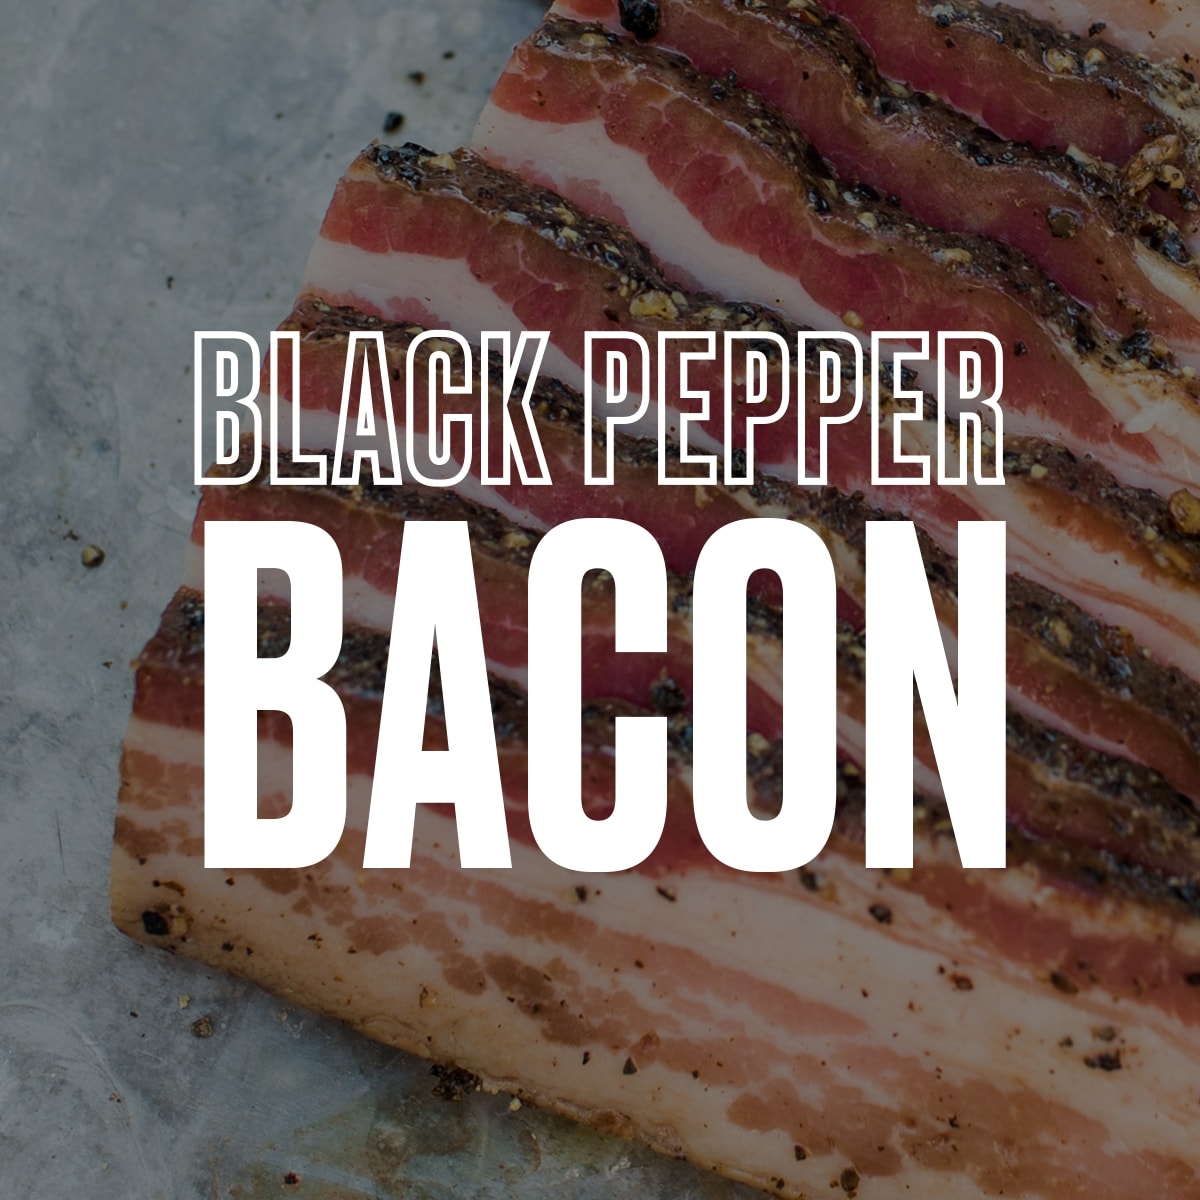 MeatCrafters' Black Pepper Bacon